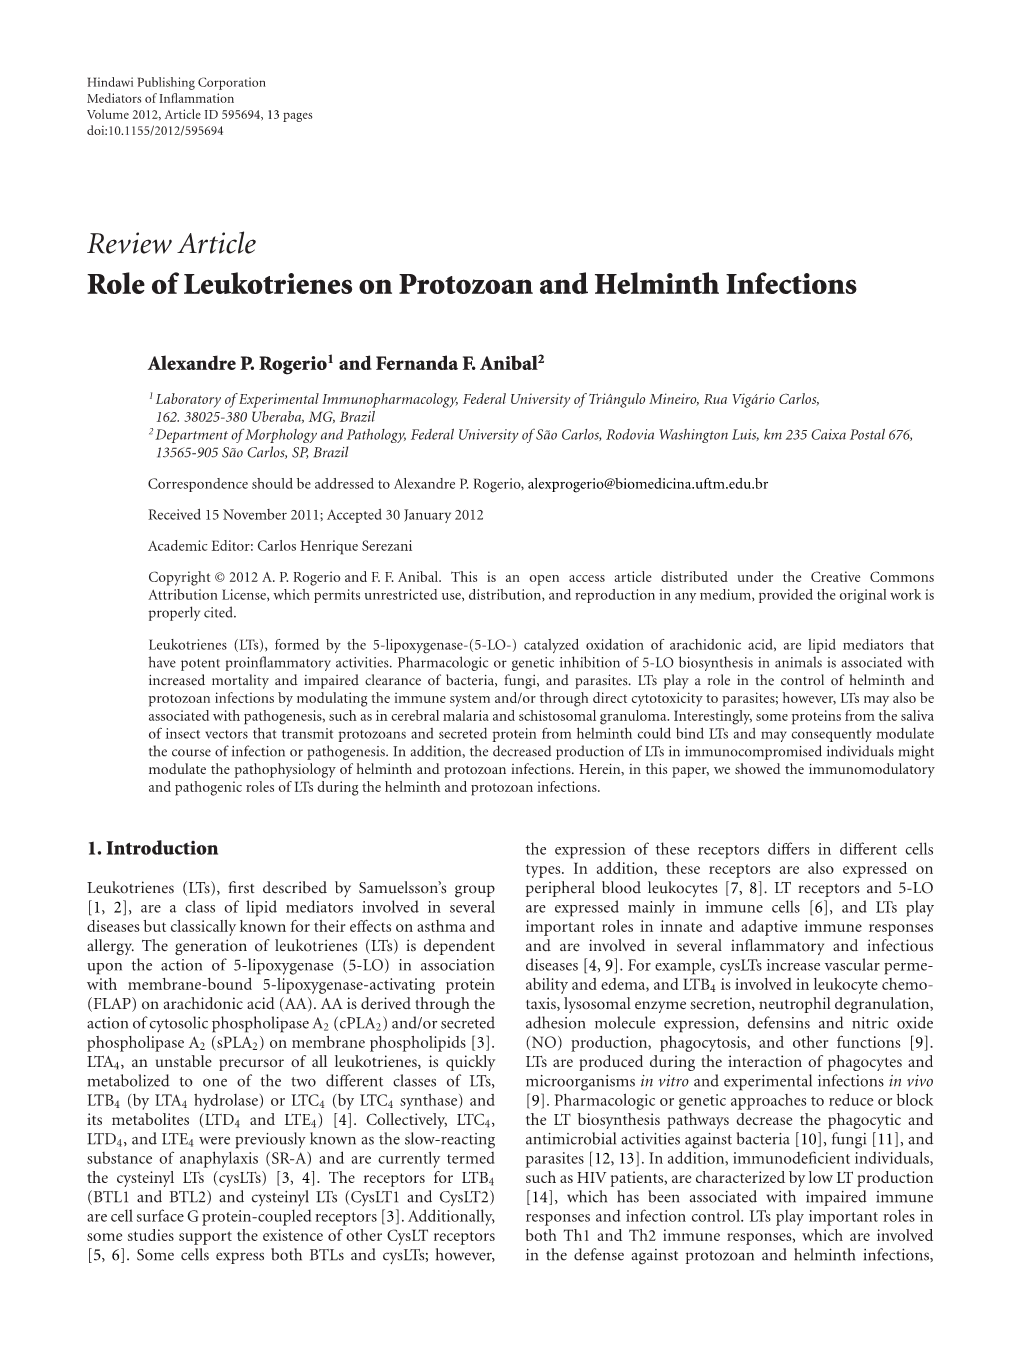 Role of Leukotrienes on Protozoan and Helminth Infections